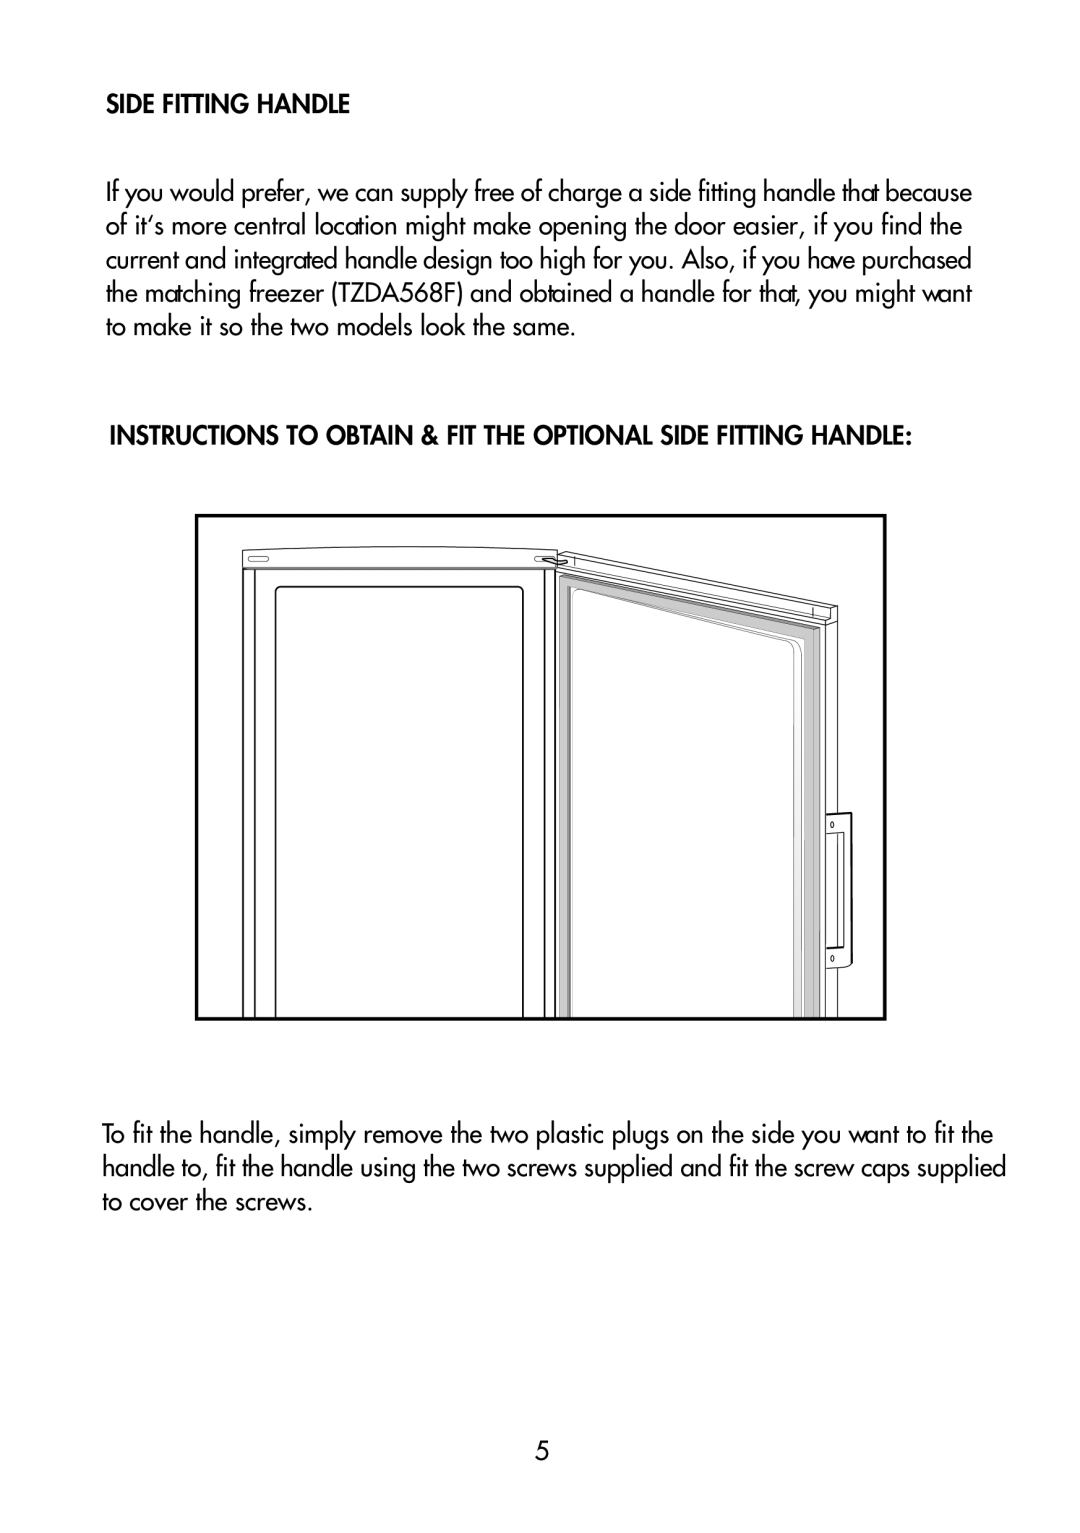 Beko TLDA 567 manual Instructions To Obtain & Fit The Optional Side Fitting Handle 